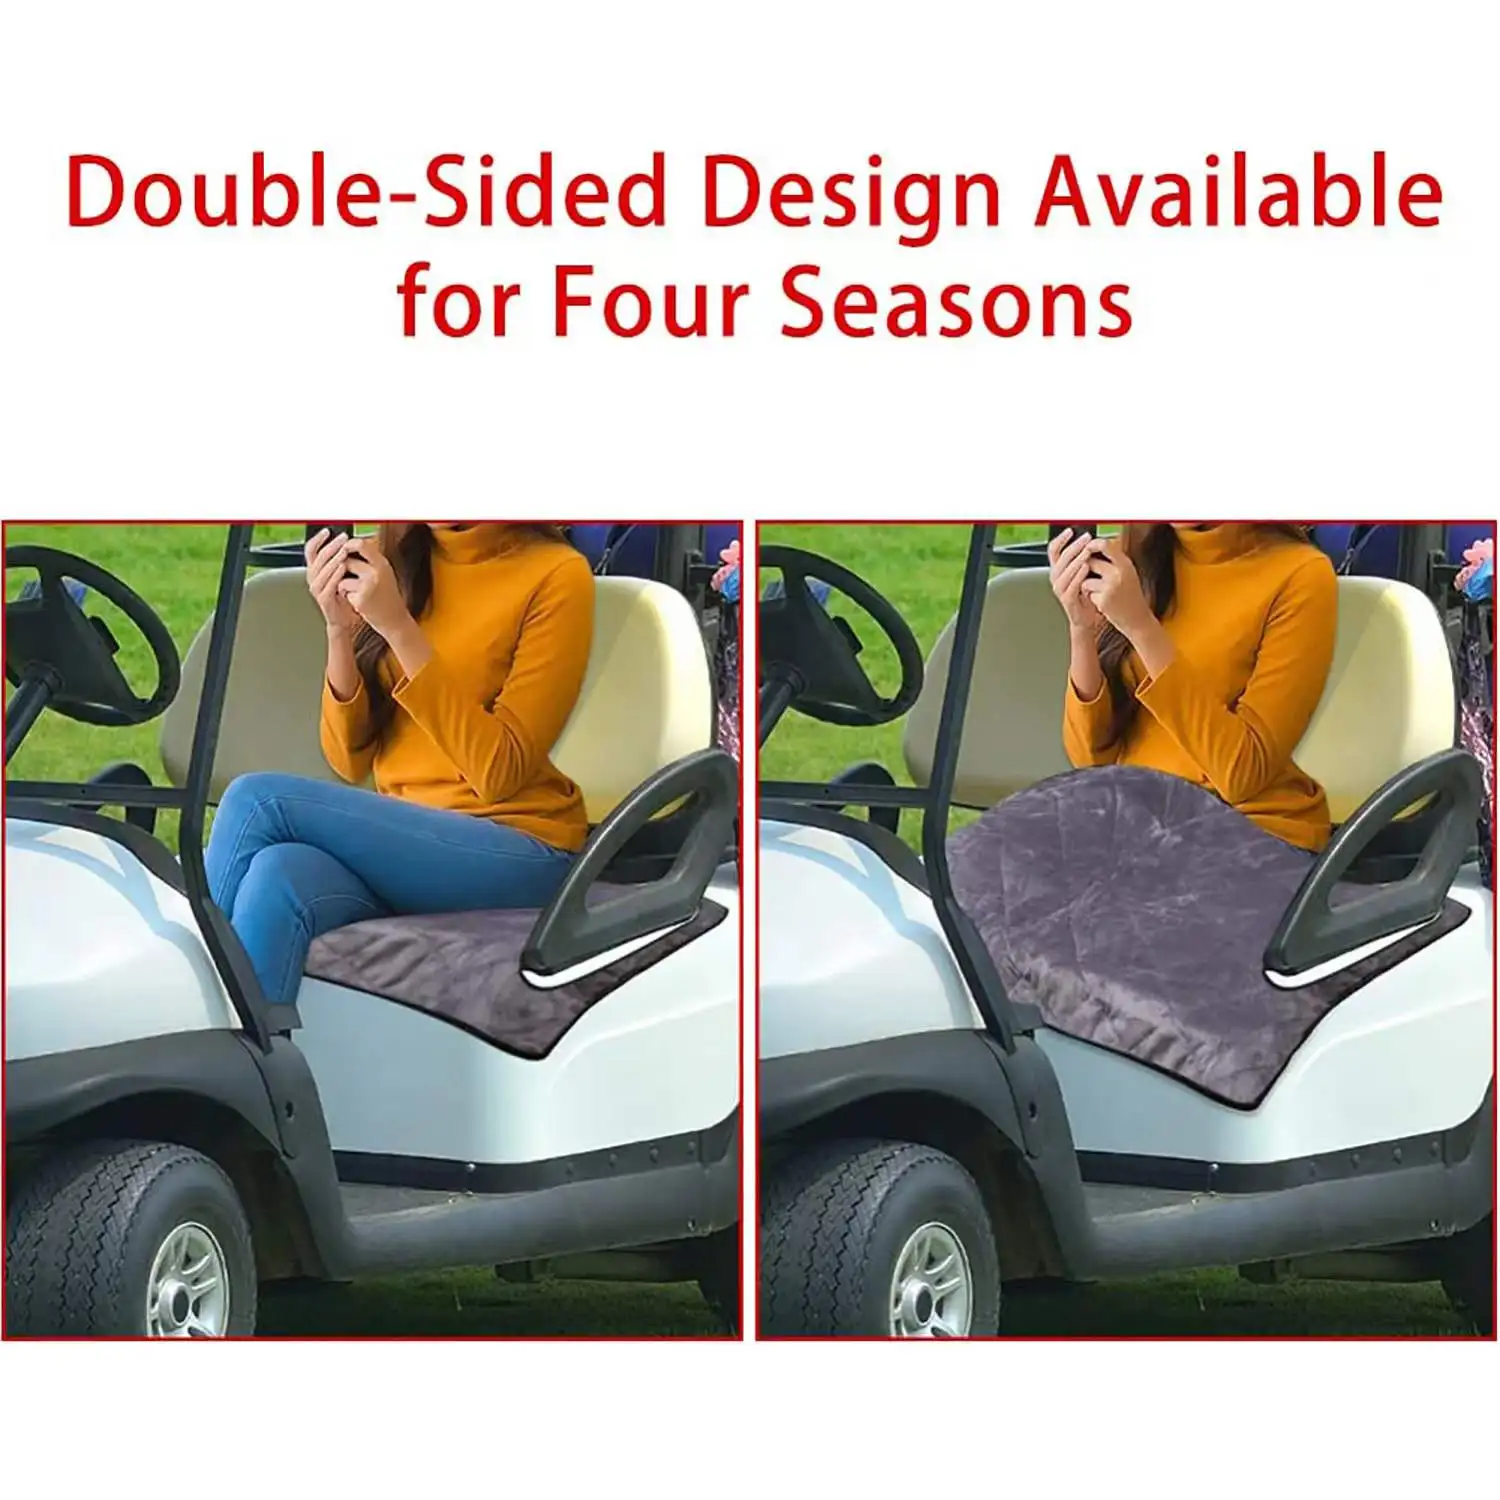 Cotton Golf towel seat cover 73x150cm golf cart seat blanket cover pattern